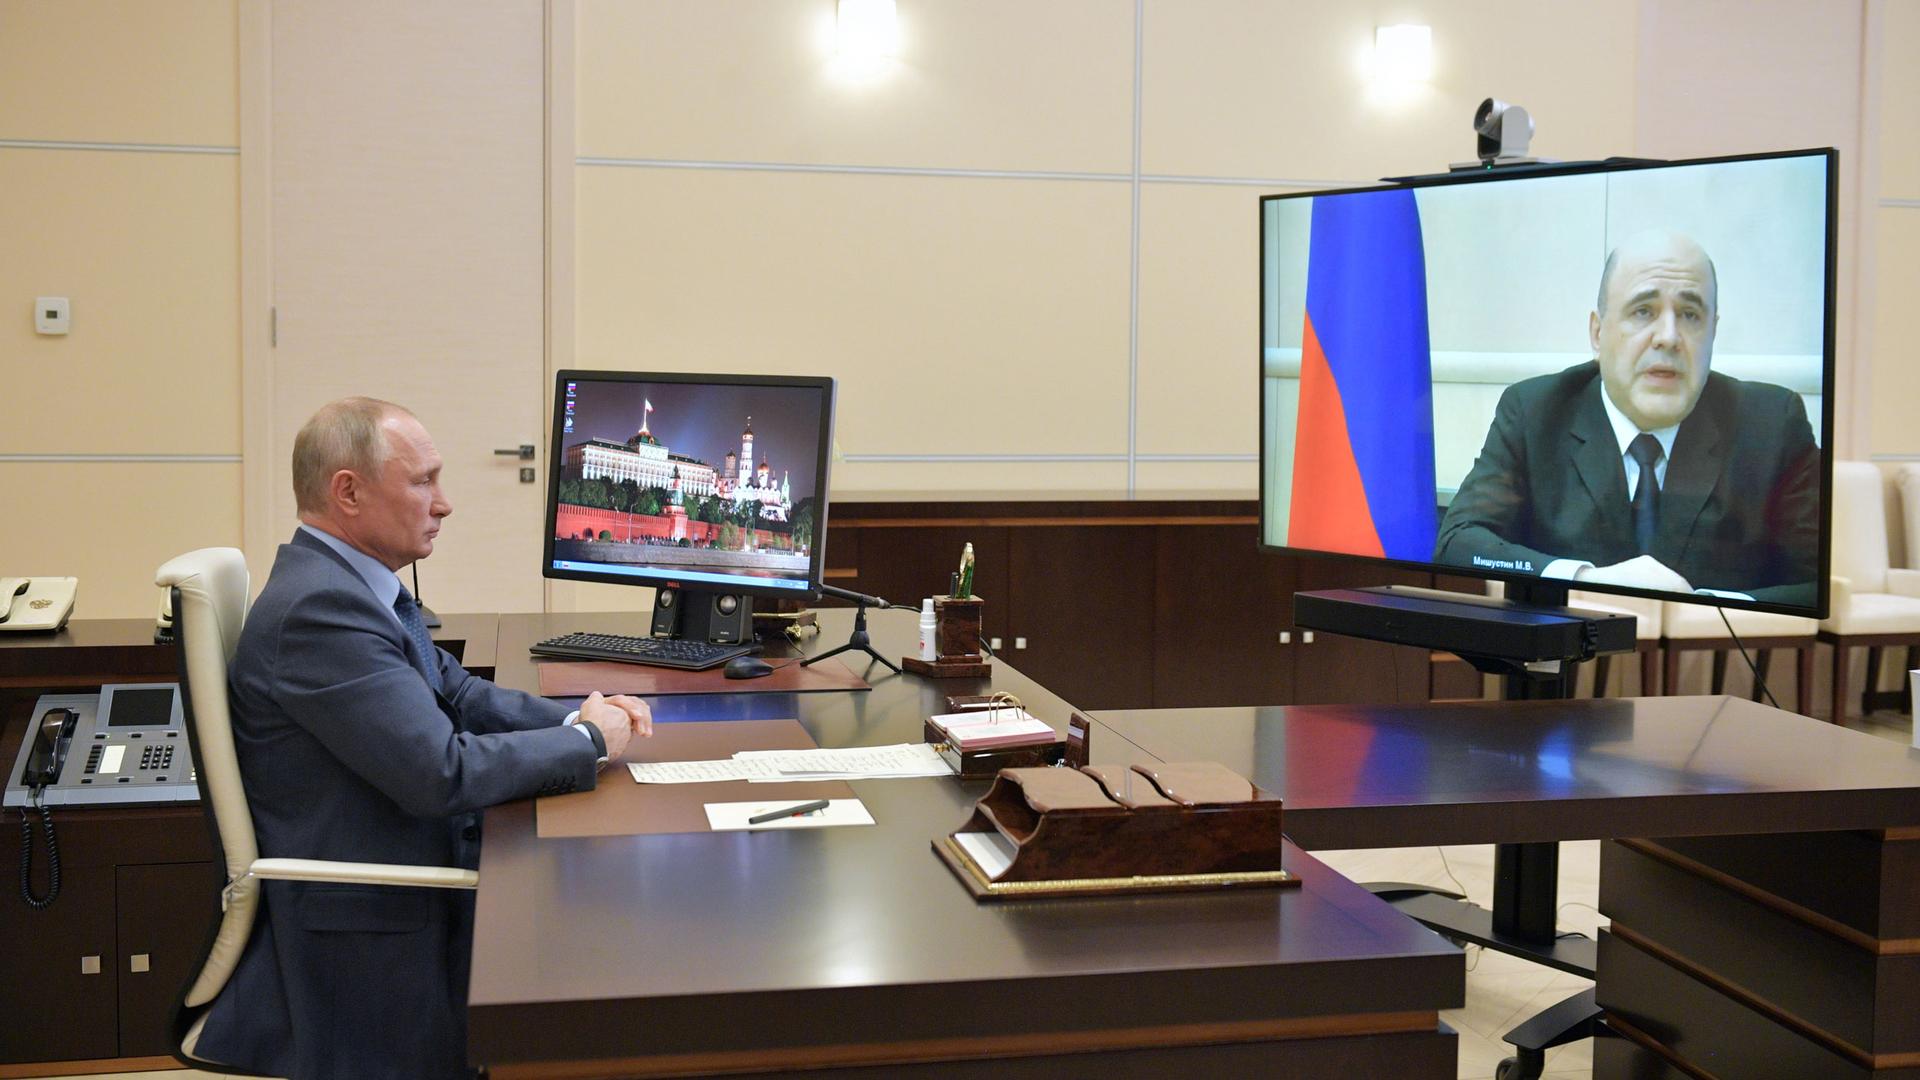 A man at a desk looks at a man on large screen 